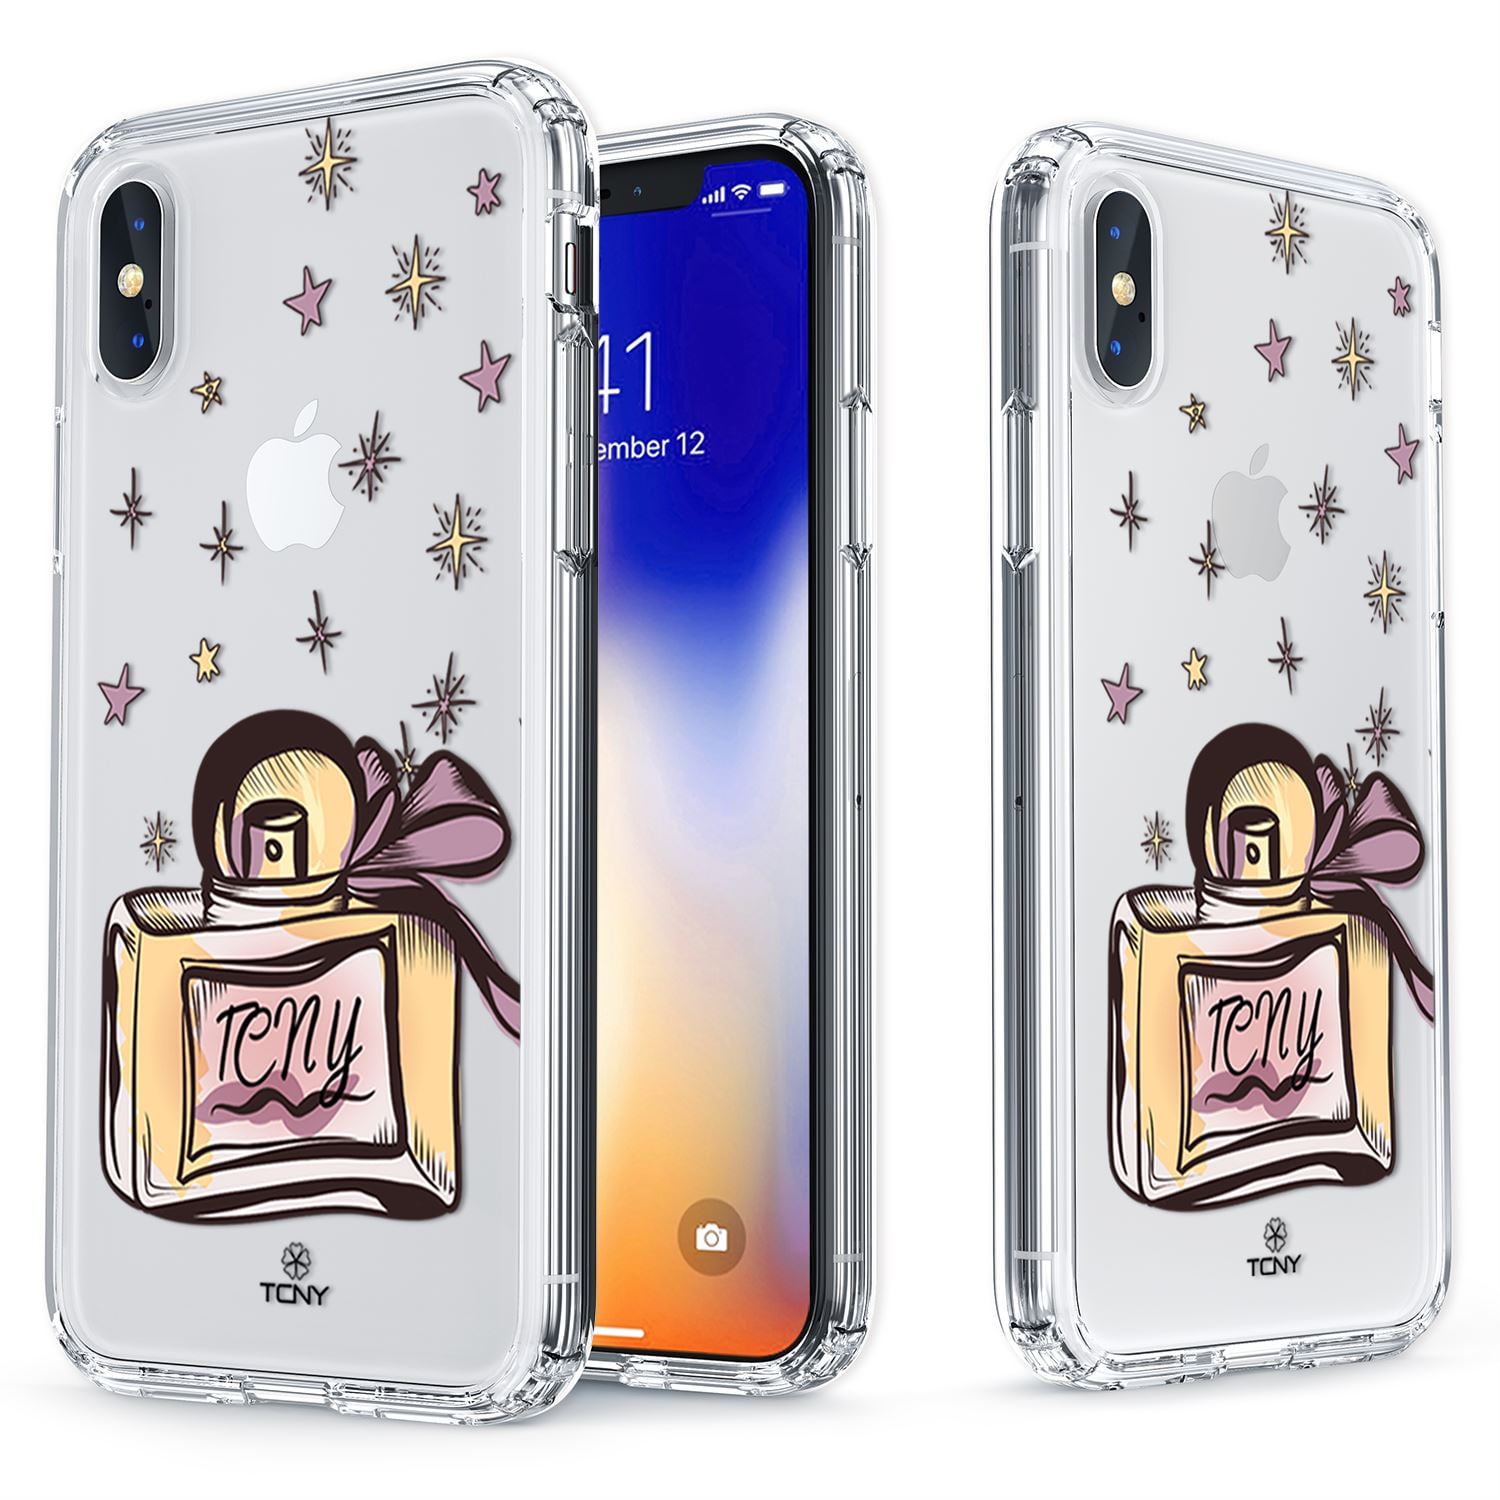 Iphone X Iphone Xs Perfume Case True Color Clear Shield Cute Girly Perfume Bottle Stars Printed On Transparent Back Soft Hard Slim Shockproof Dustproof Protective Bumper Cover Walmart Com